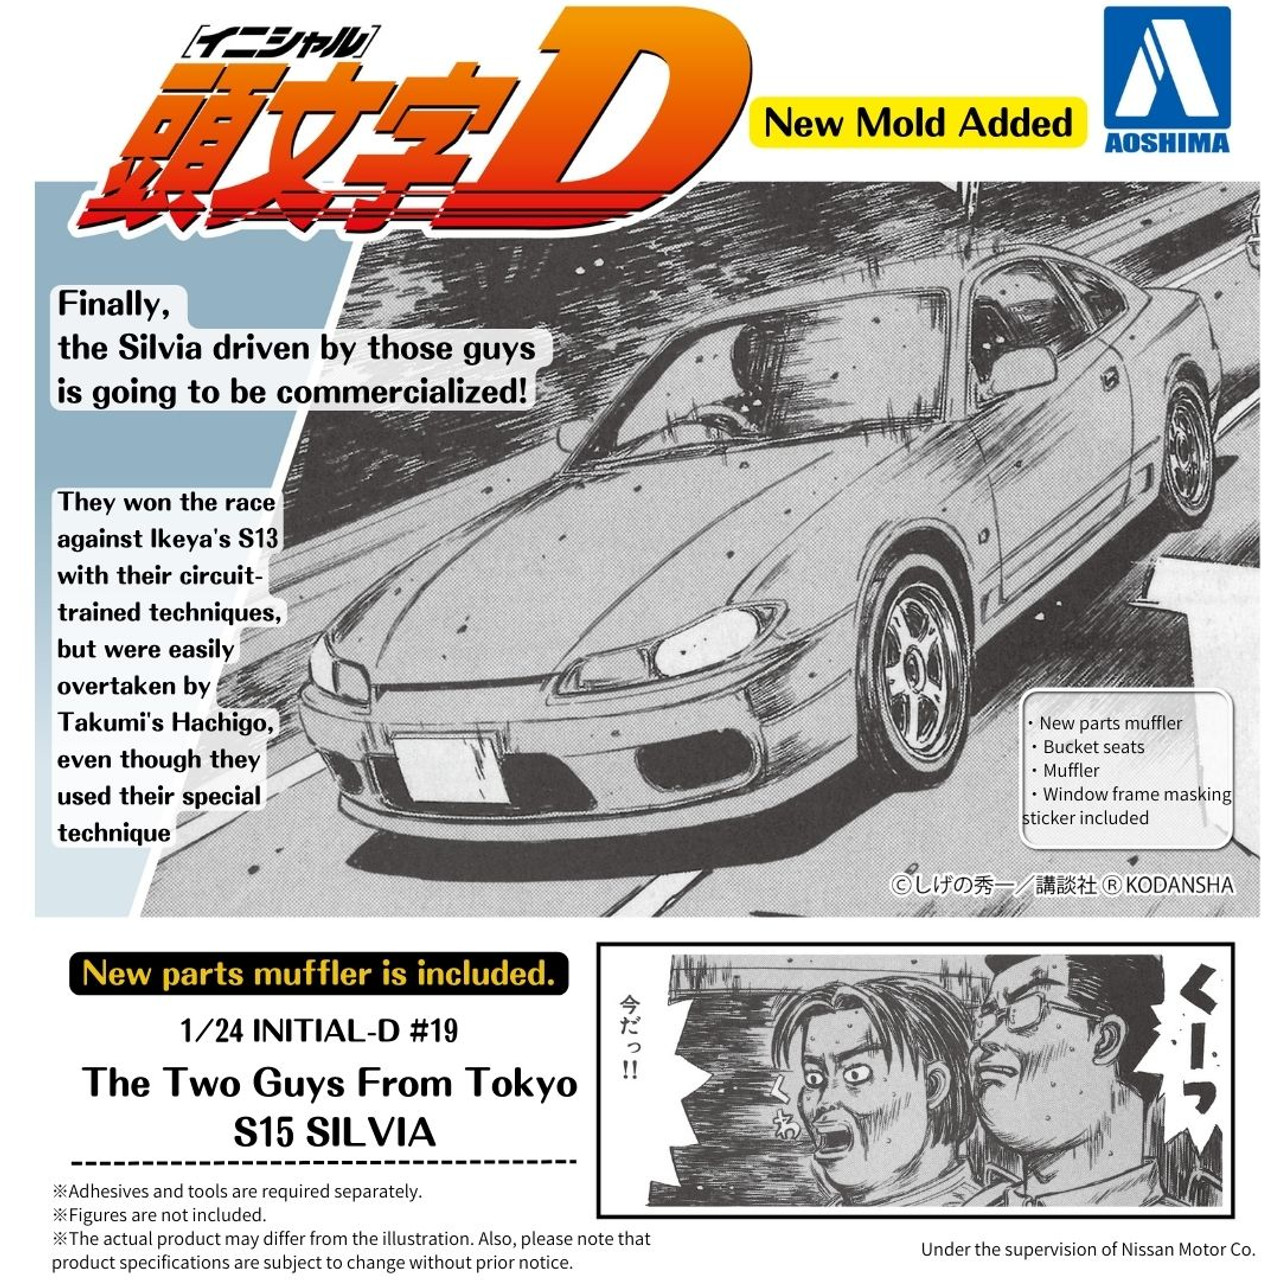 1/24 Initial-D Series #19 The Two Guys From Tokyo S15 Silvia - AOS06611